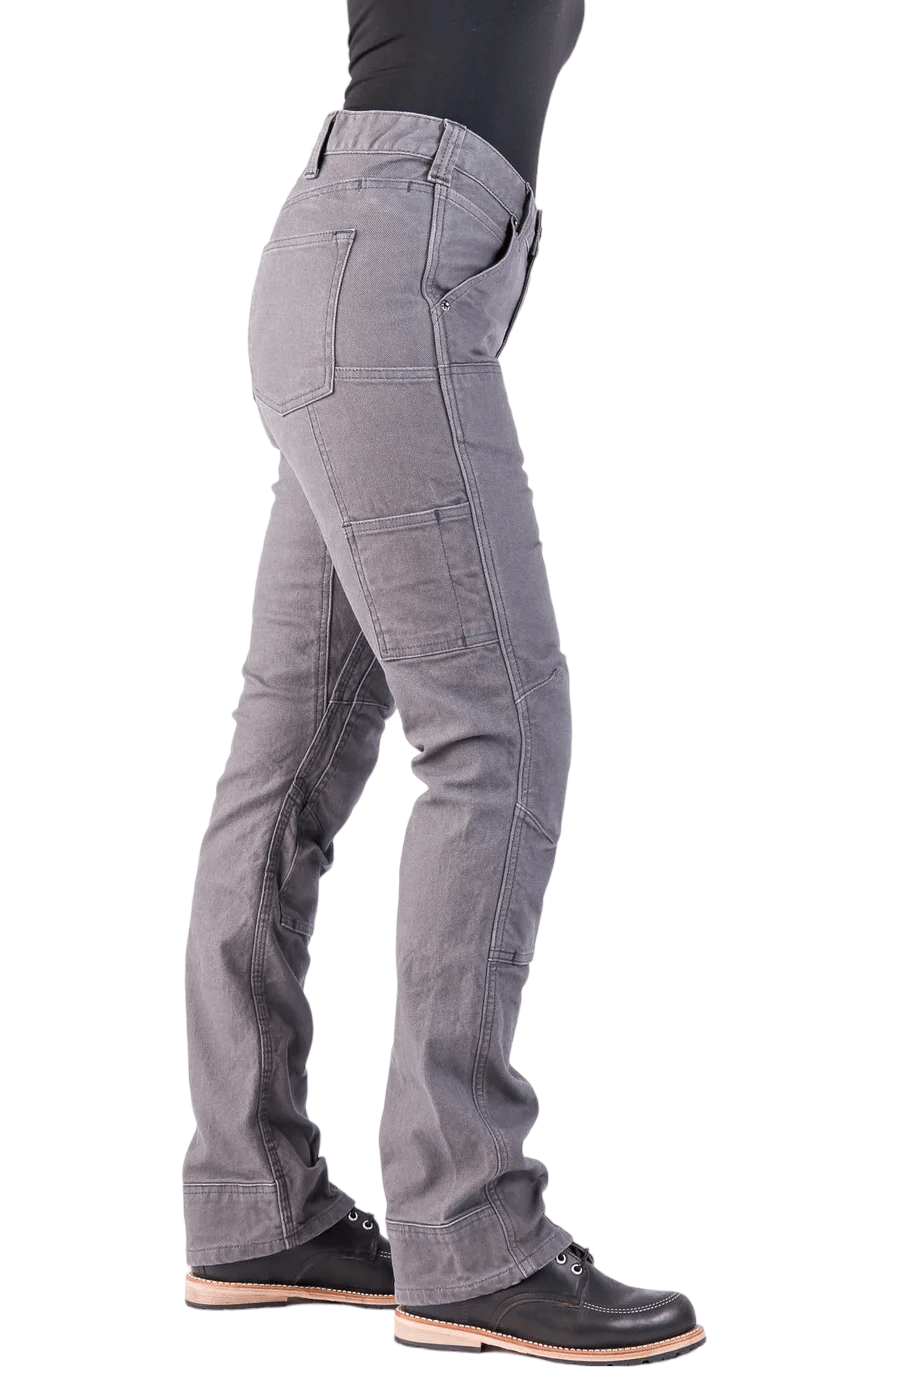 https://womensworkwear.ca/wp-content/uploads/2022/06/Dovetail-Utility-Gray-180618-162-2000px_920x-PhotoRoom.png